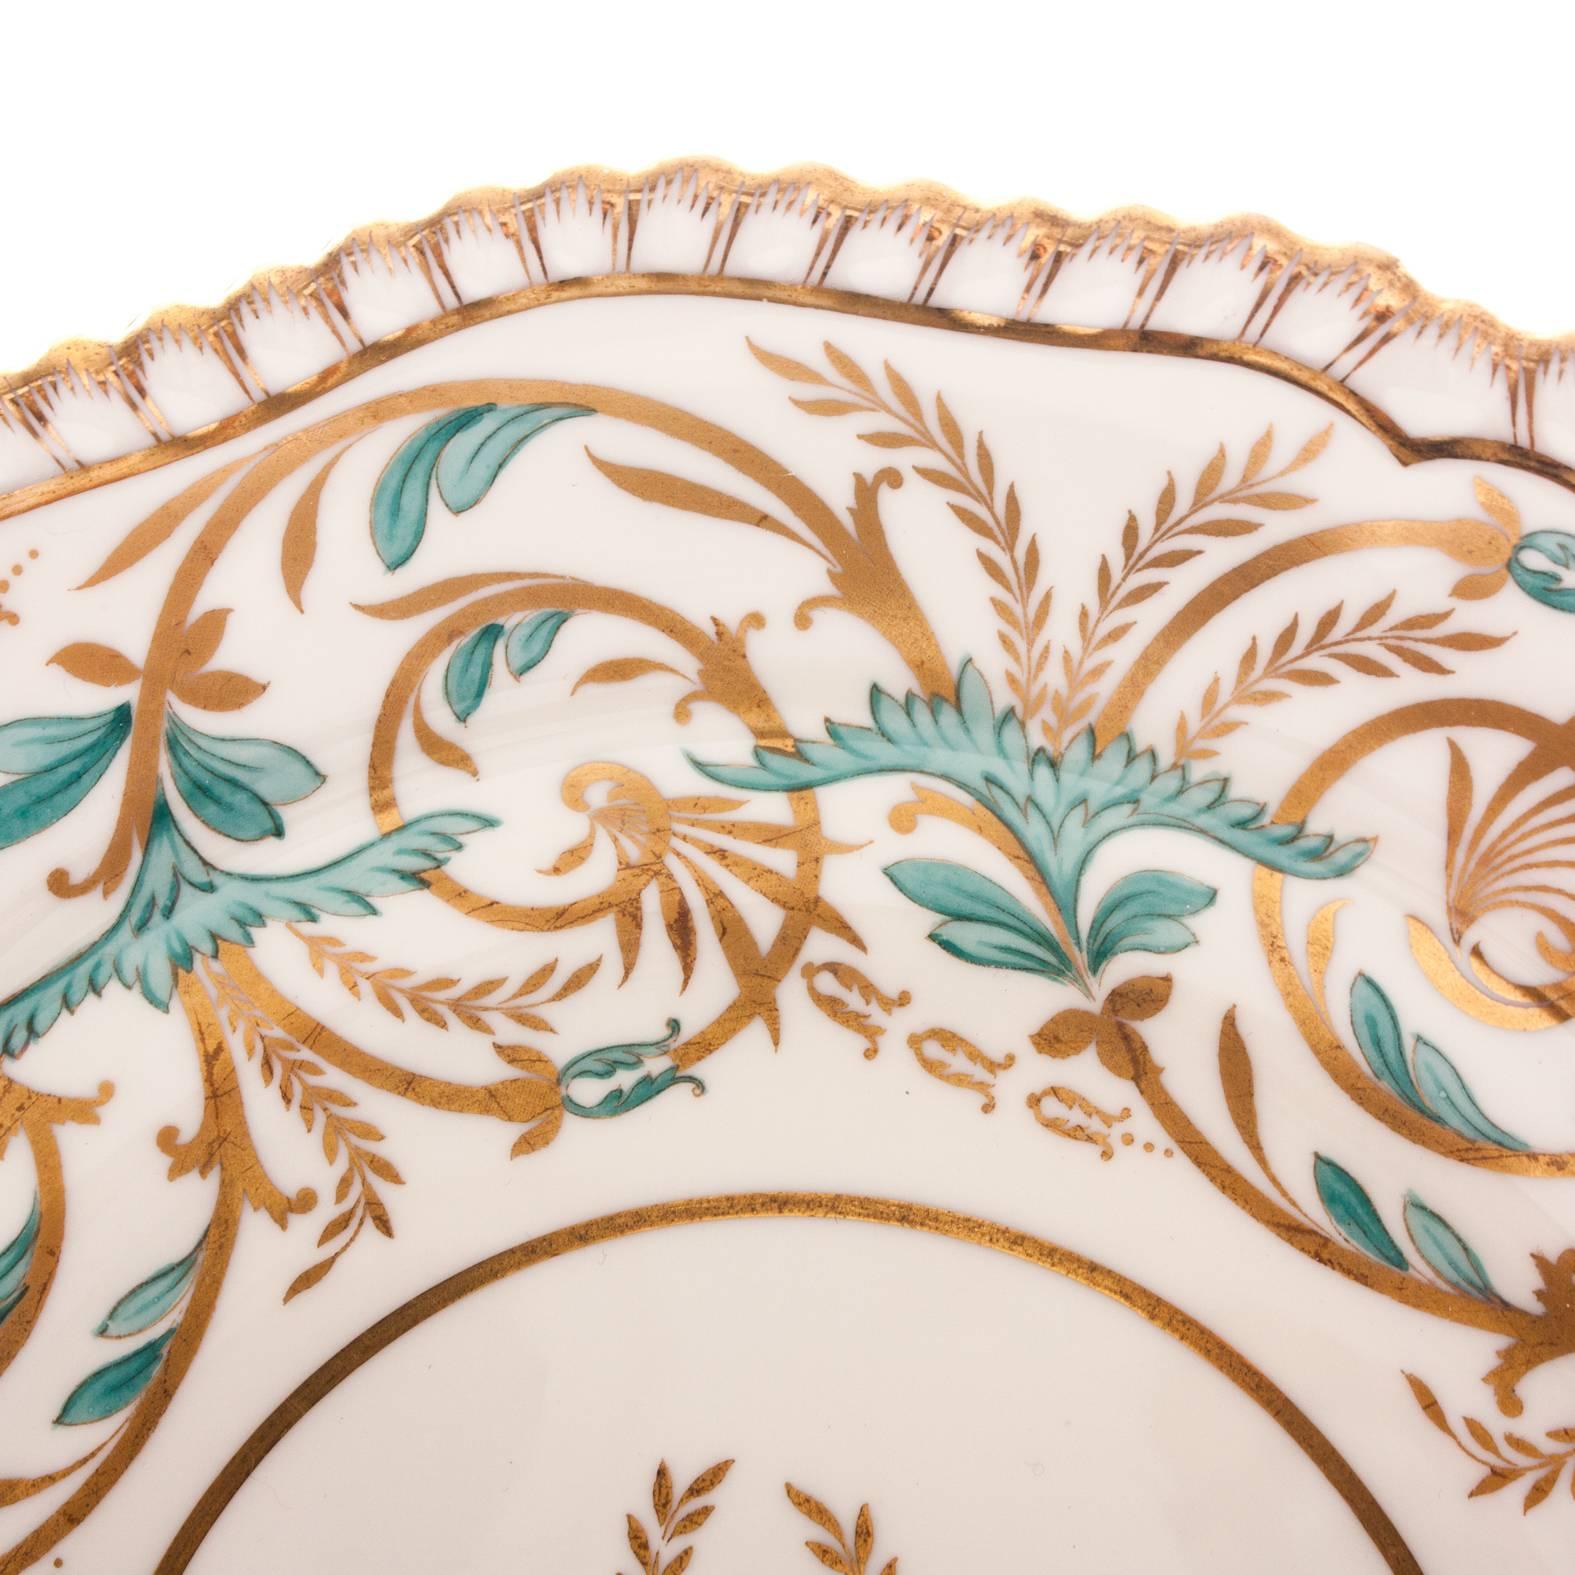 One of Spode's classic Antique Patterns highlighted in a vibrant turquoise color. Produced in 1920's from their archive collection. Featuring a beautiful gadroon edge, center medallion and allover gilt design. Perfect for mixing and matching in with